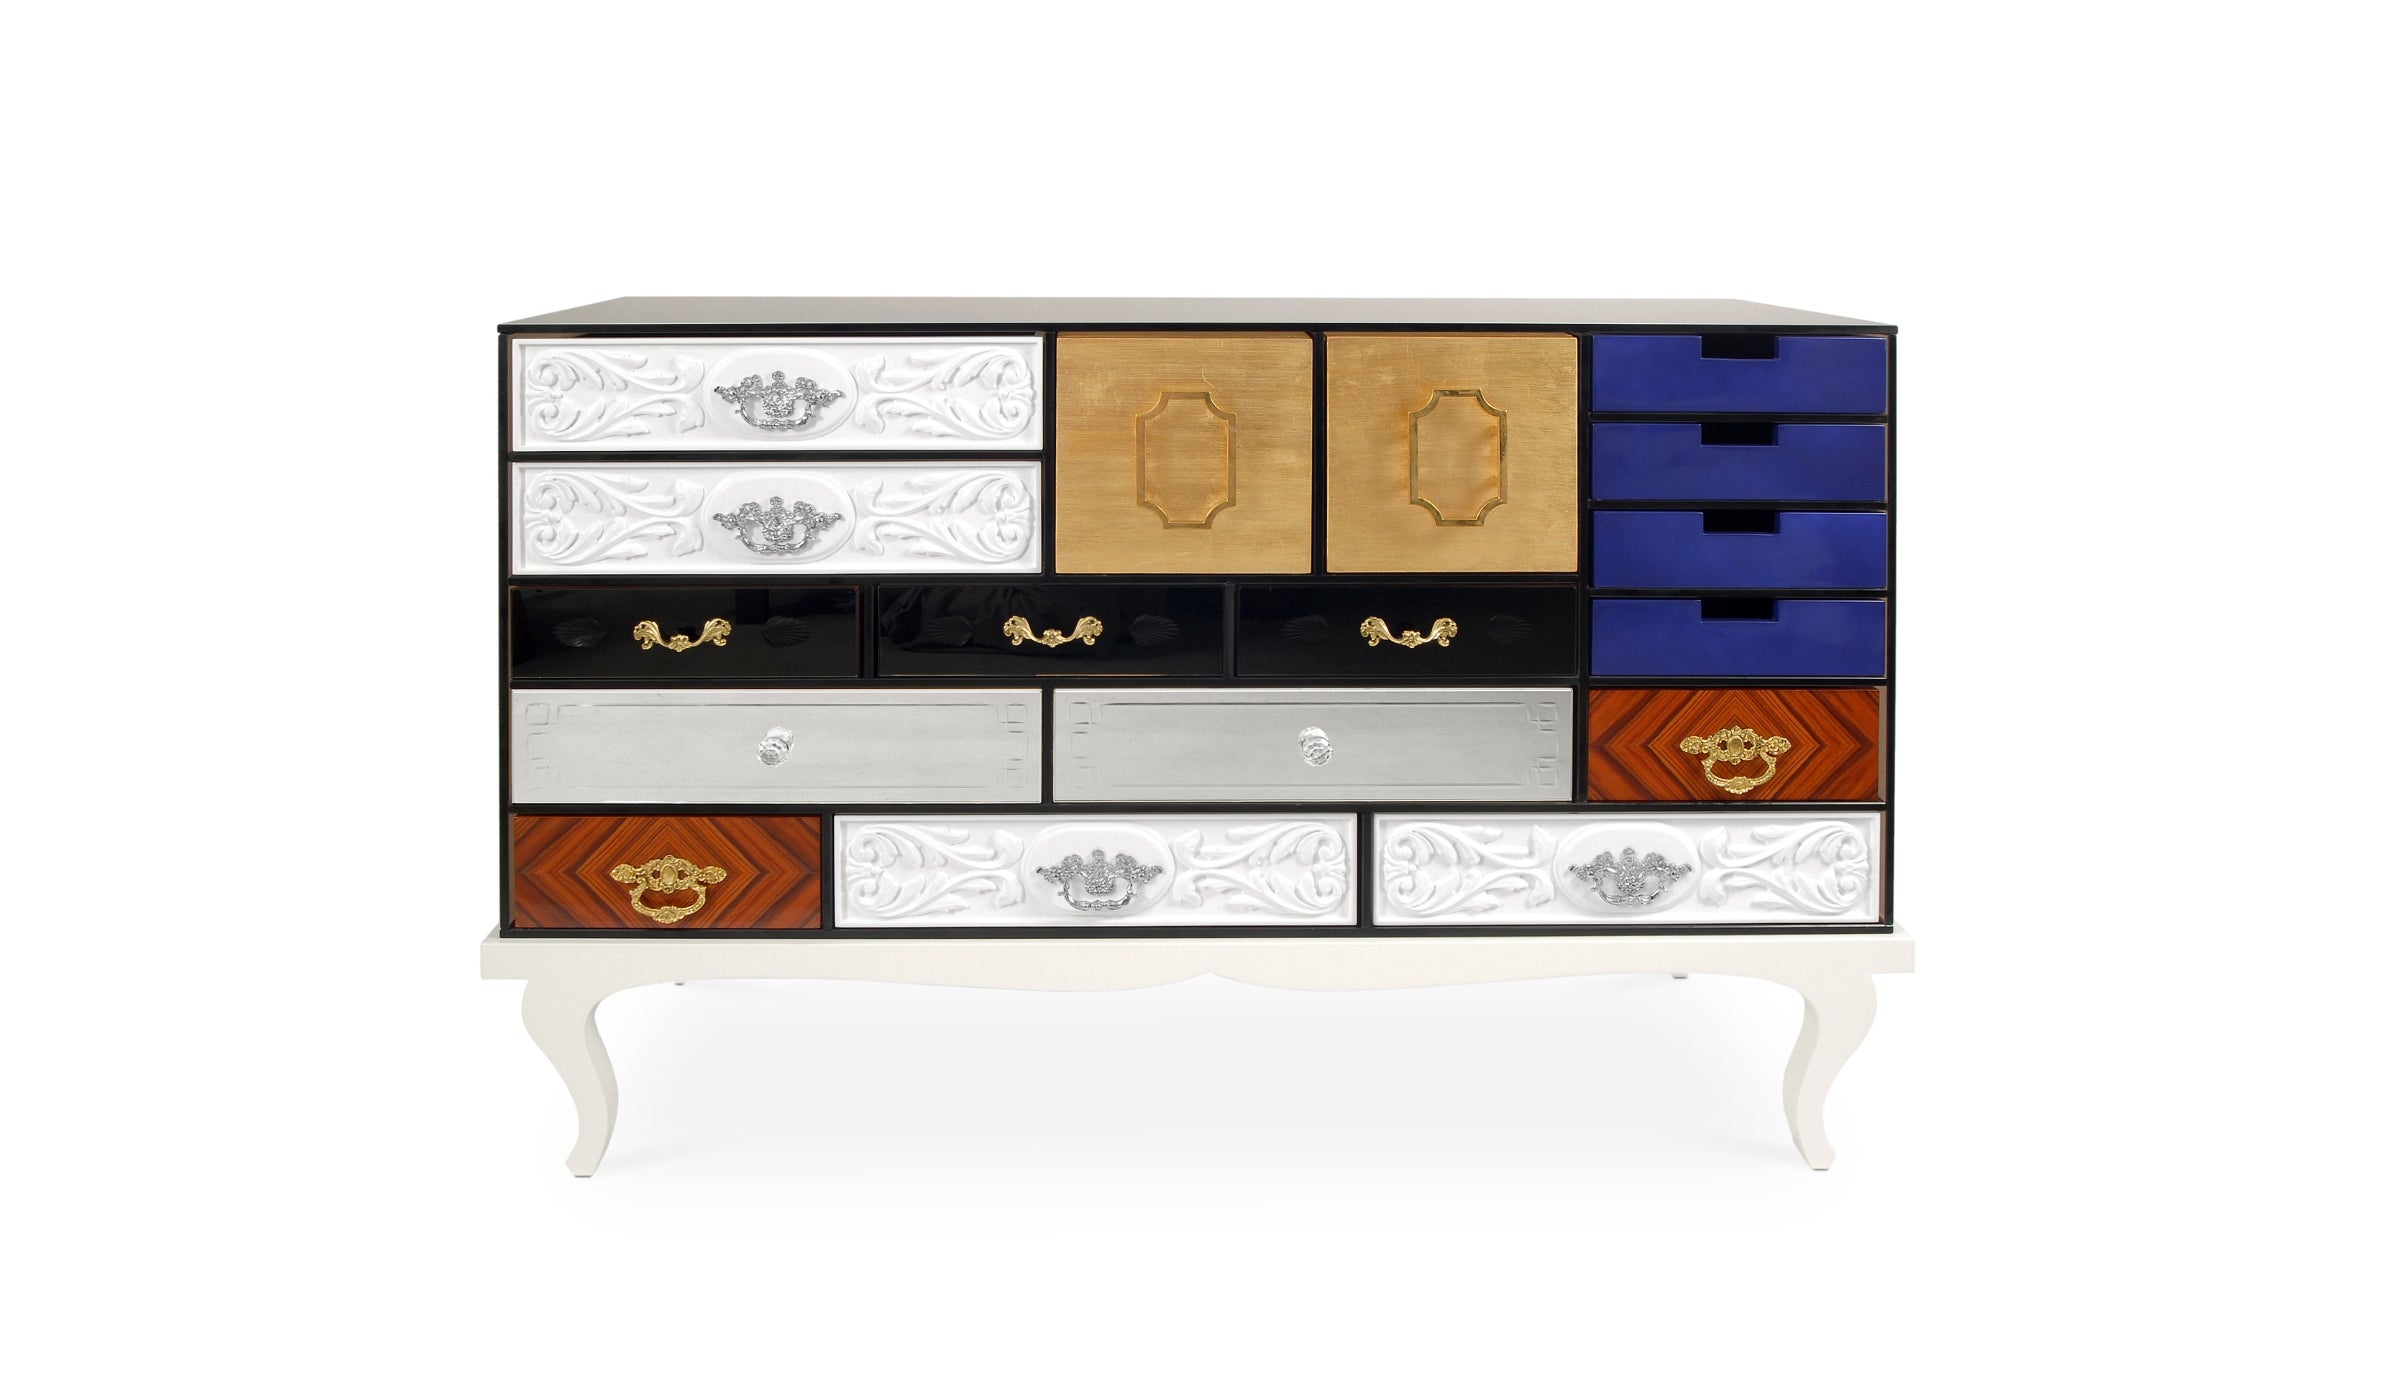 Soho - Multicolored sideboard in tempered glass and brass, luxury craftsmanship